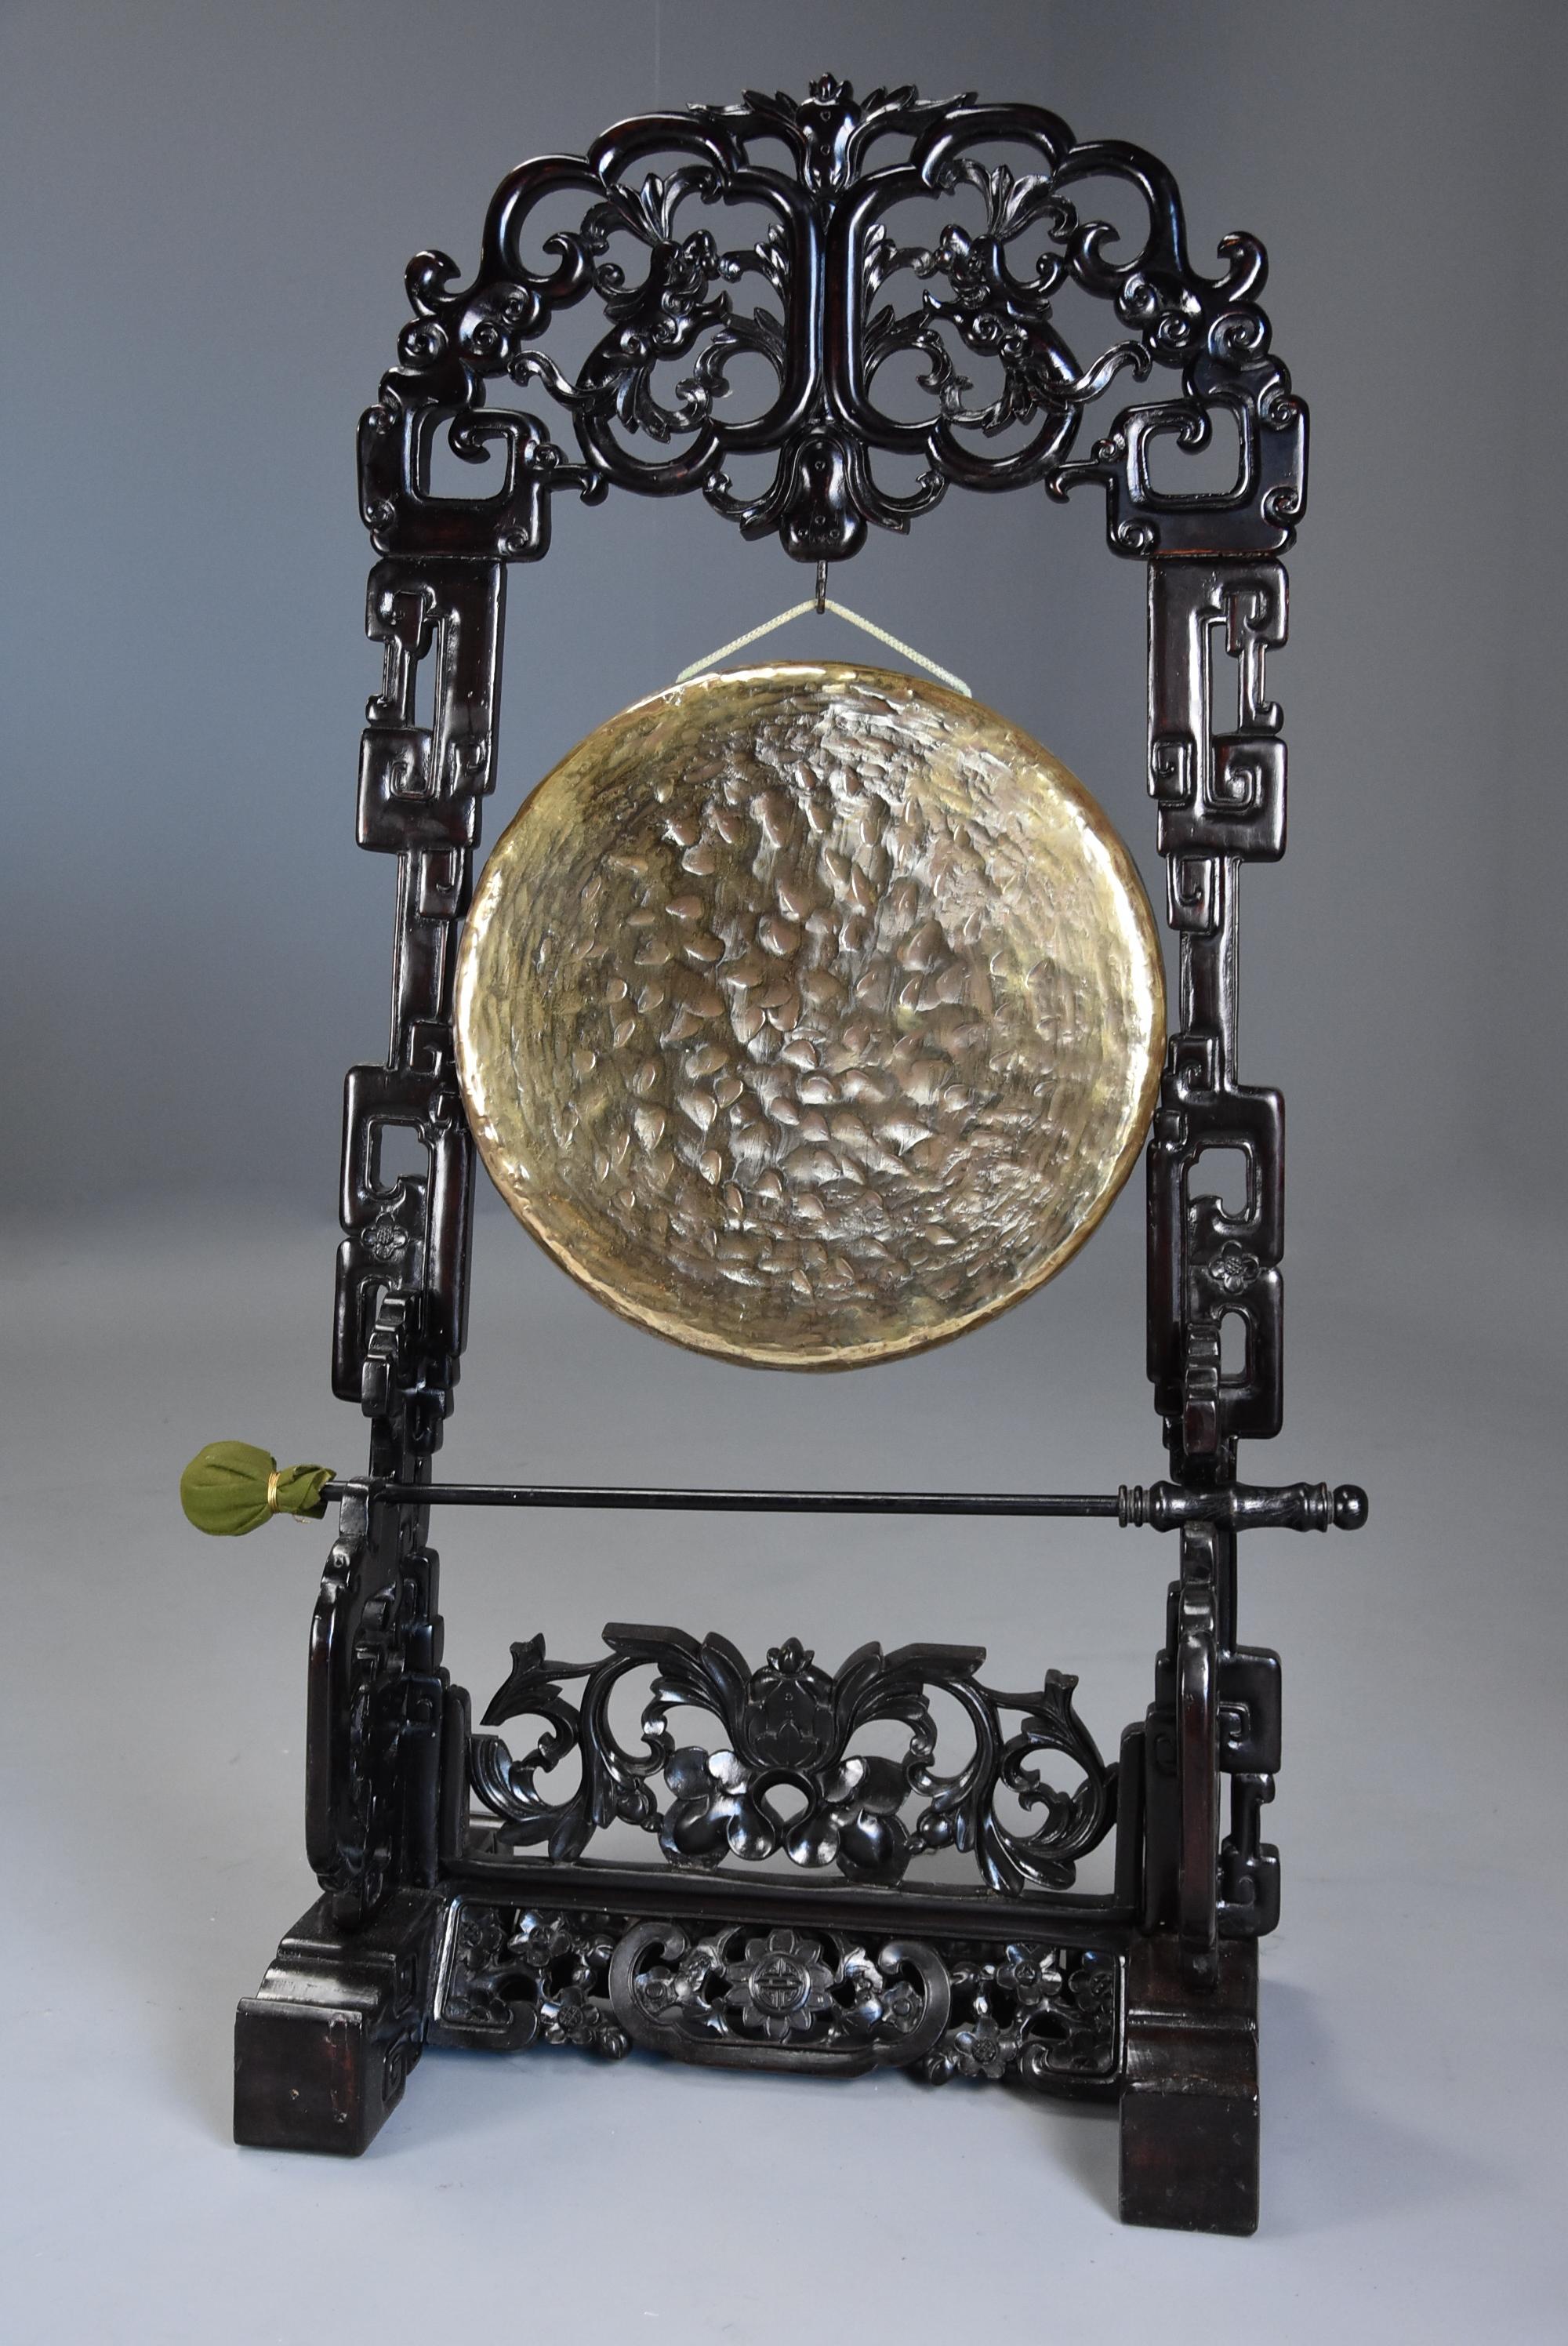 A large fine quality highly decorative late 19th century Chinese hardwood dinner gong with striker.

This highly decorative gong consists of a finely carved and pierced hardwood frame with dragon, foliate and geometric carved decoration with